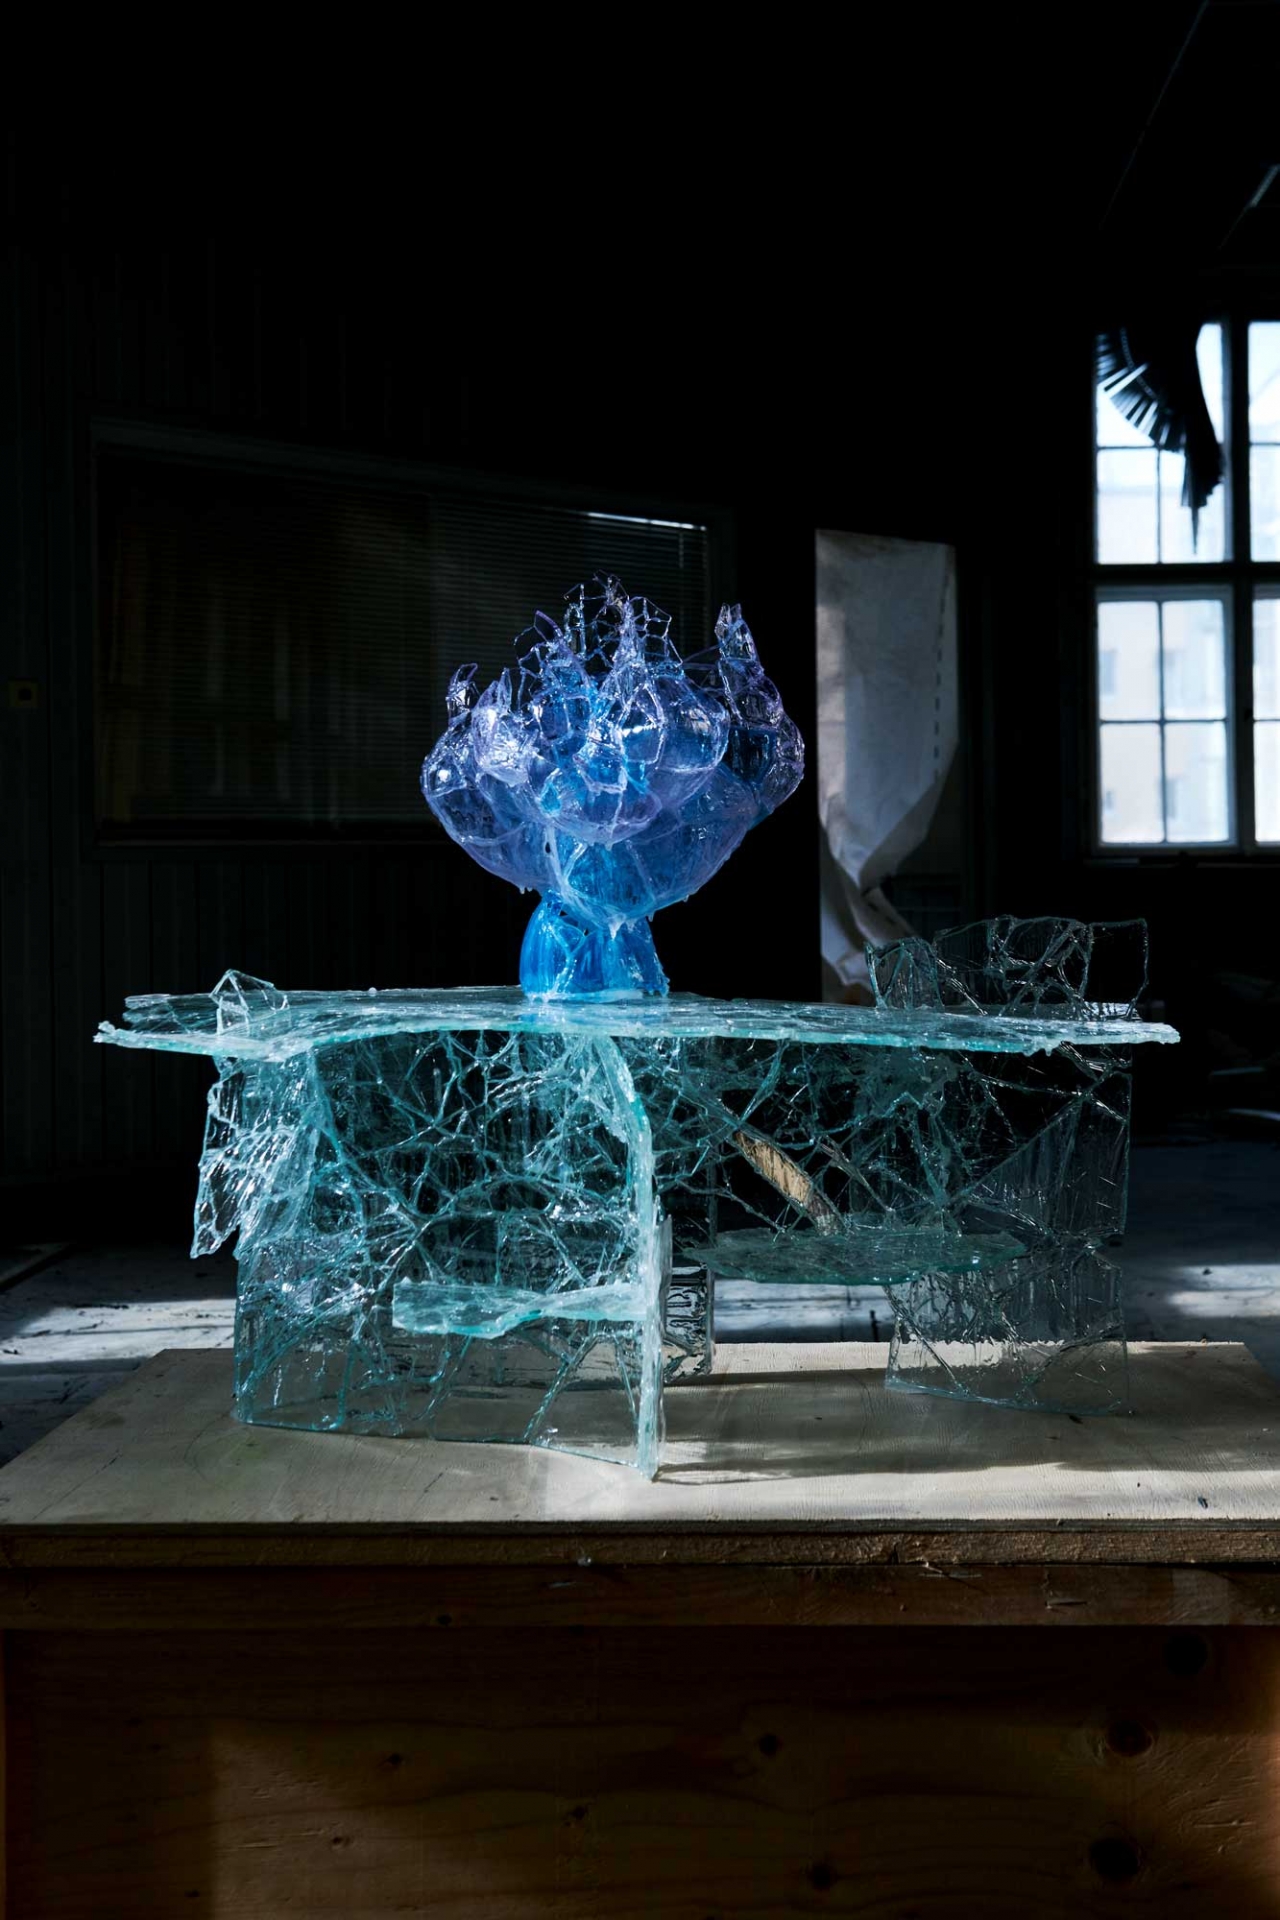 The Moravian Gallery and Designblok send the best Czech designers of glass, porcelain and ceramics to Milan. They will be presented in the unique Made by Fire exhibition at the Triennale Milano